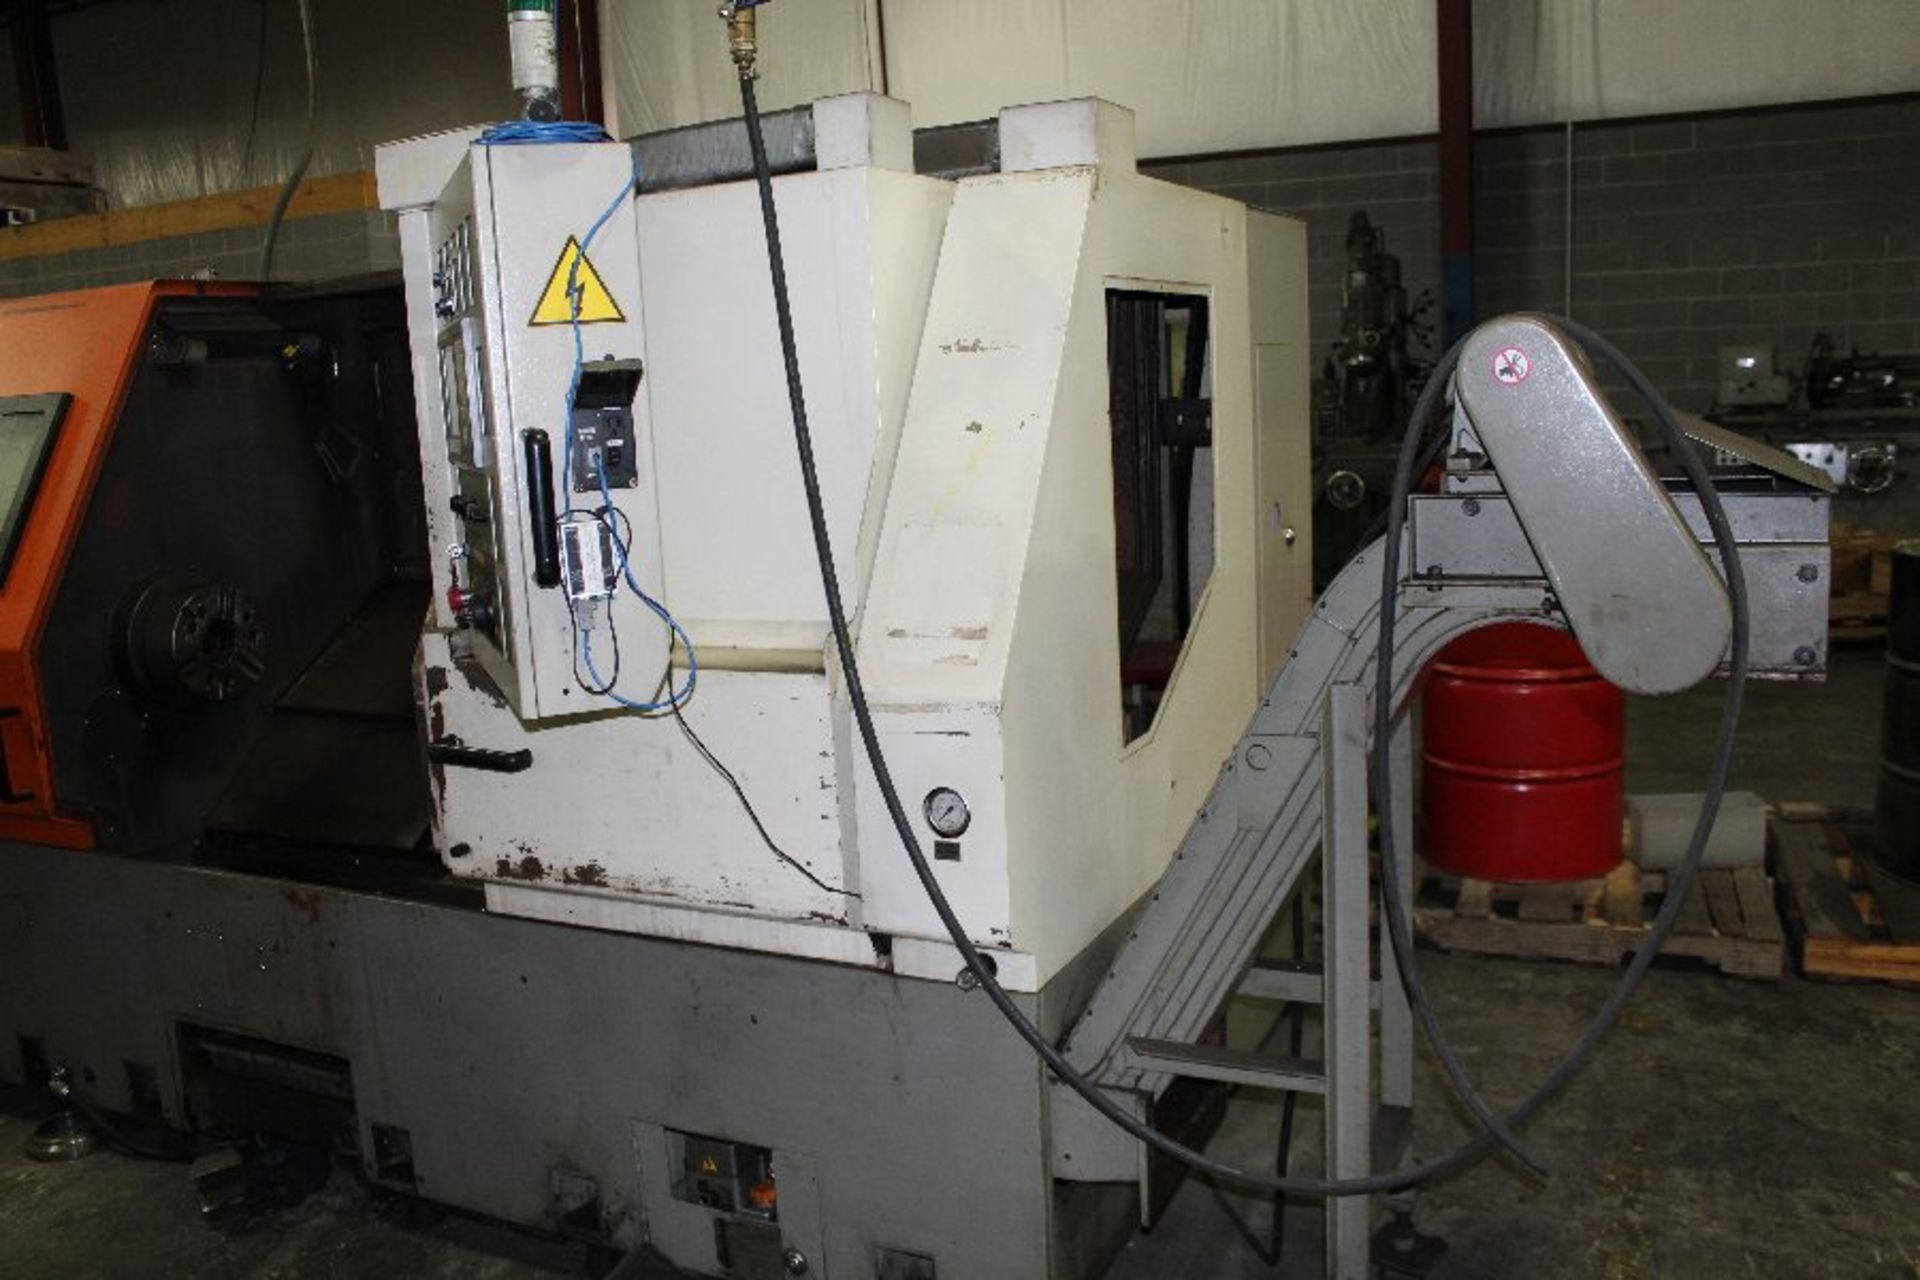 2009 OR Victor Taichung V-turn II-26 CNC Lathe, w/Fanuc Controls and chip conveyor, s/n Y2-1326 - Image 2 of 5